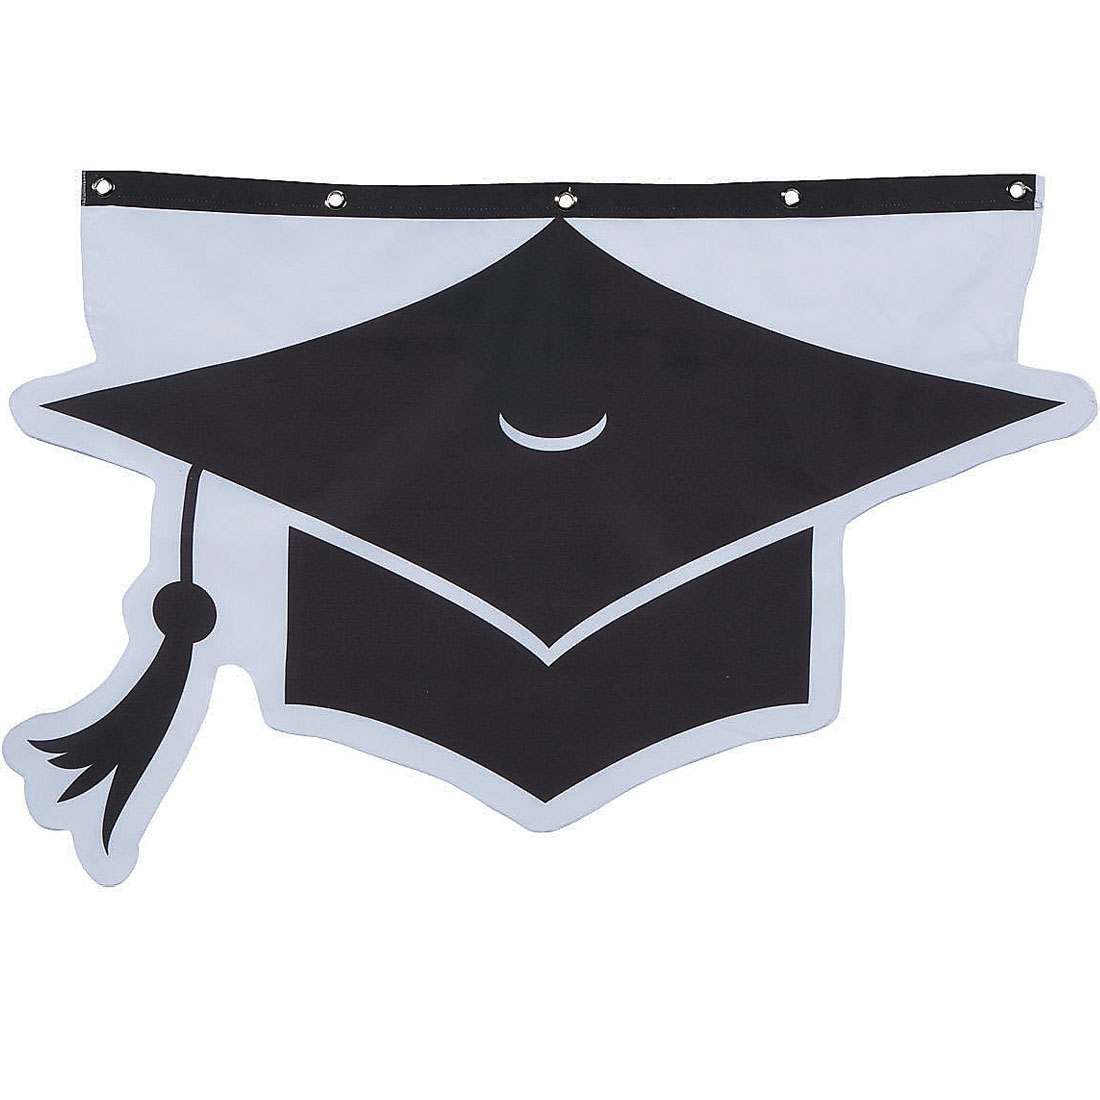 2020 Silver Graduation Supplies Party Supplies Canada Open A Party - asfsadfsadf roblox